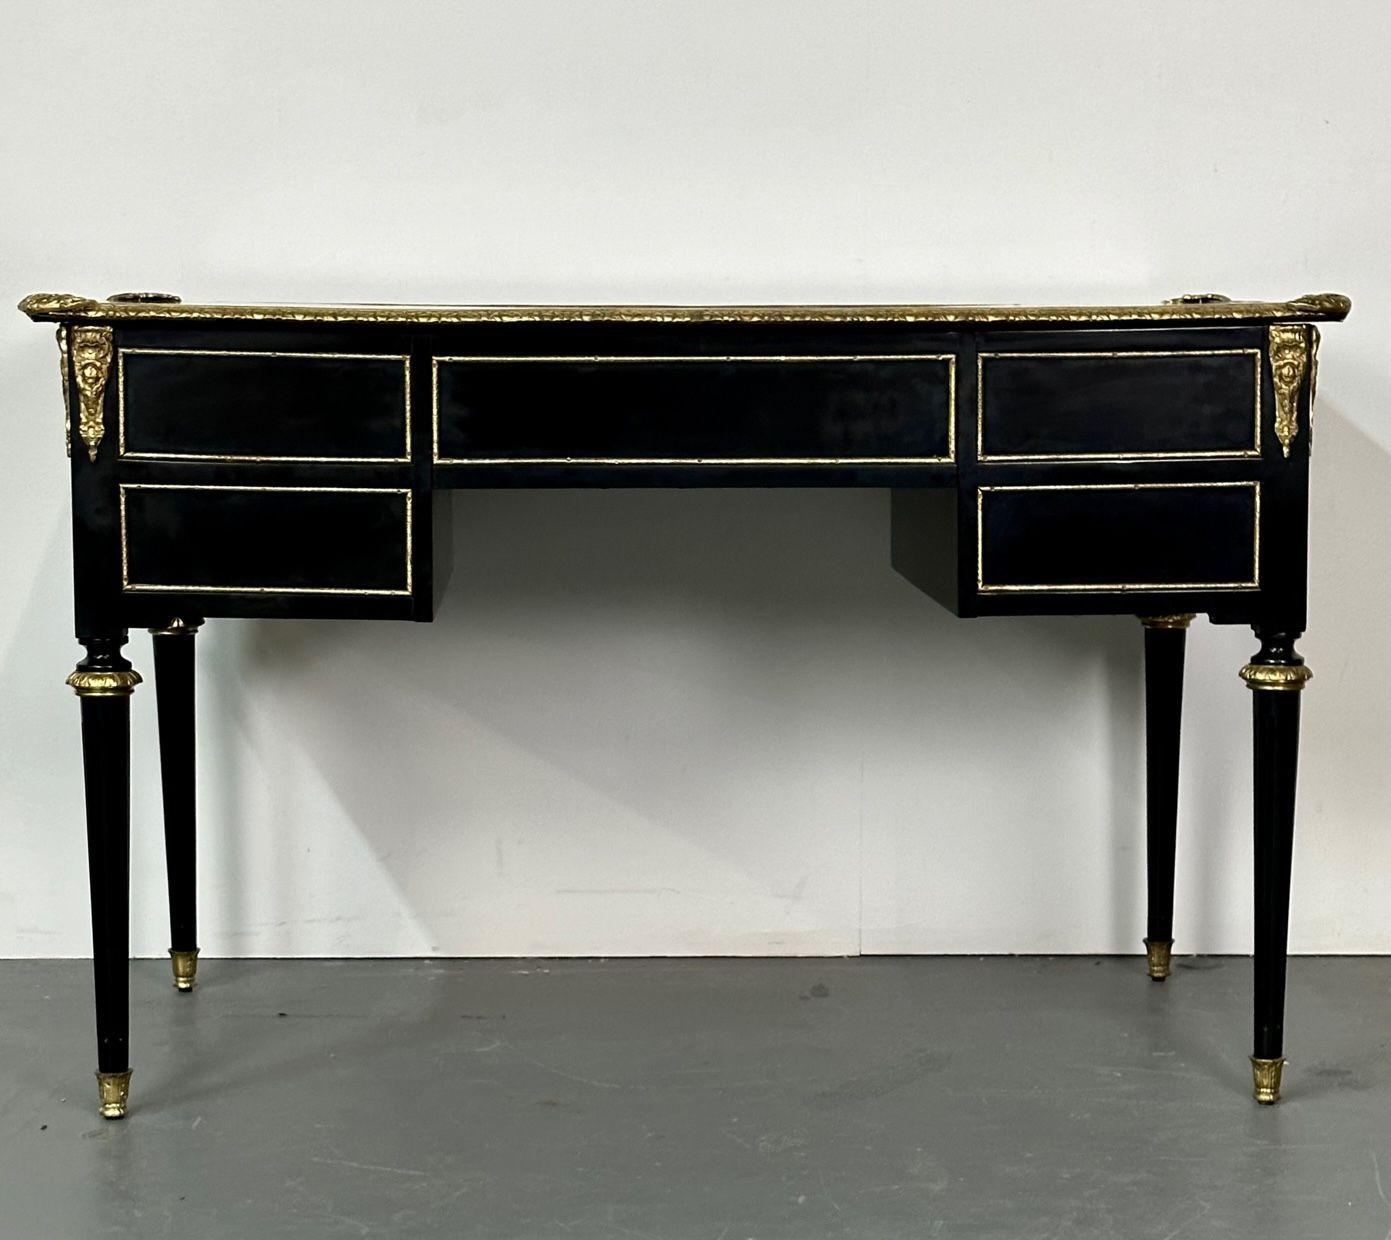 Hollywood Regency Ebony Desk, Writing Table or Vanity, Bronze Mounted, 1930s For Sale 5